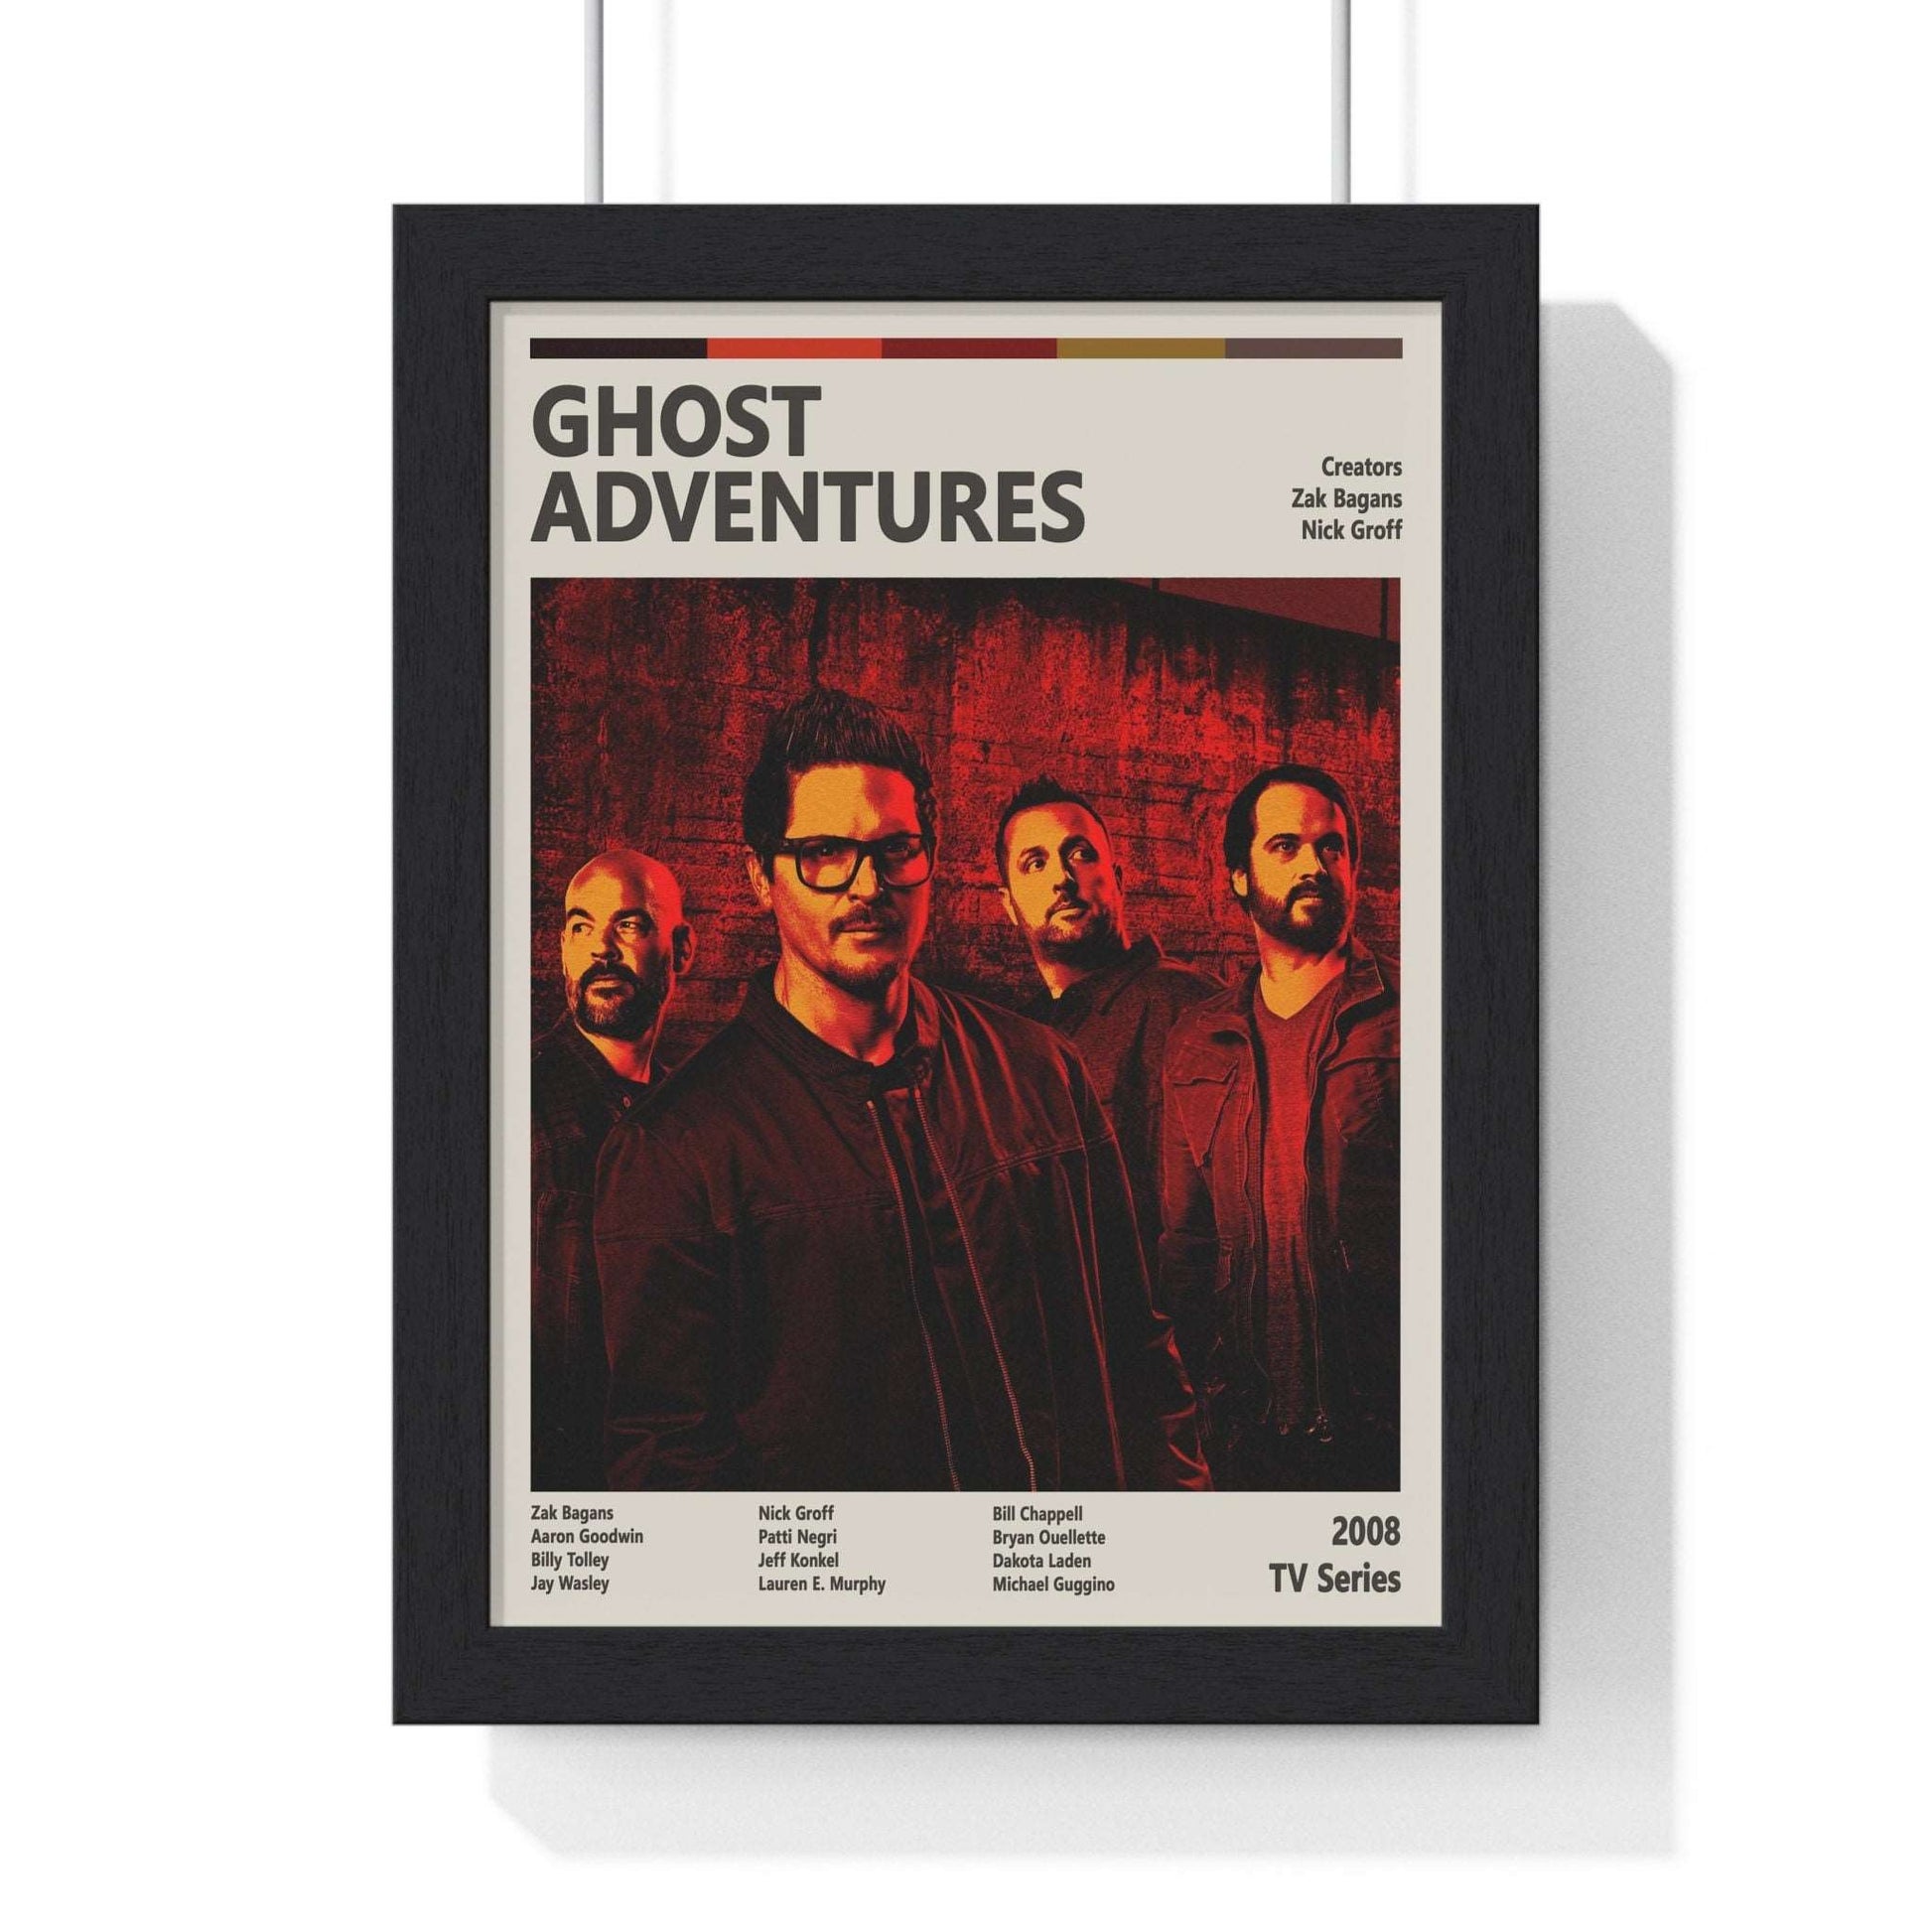 Ghost Adventures TV show Poster